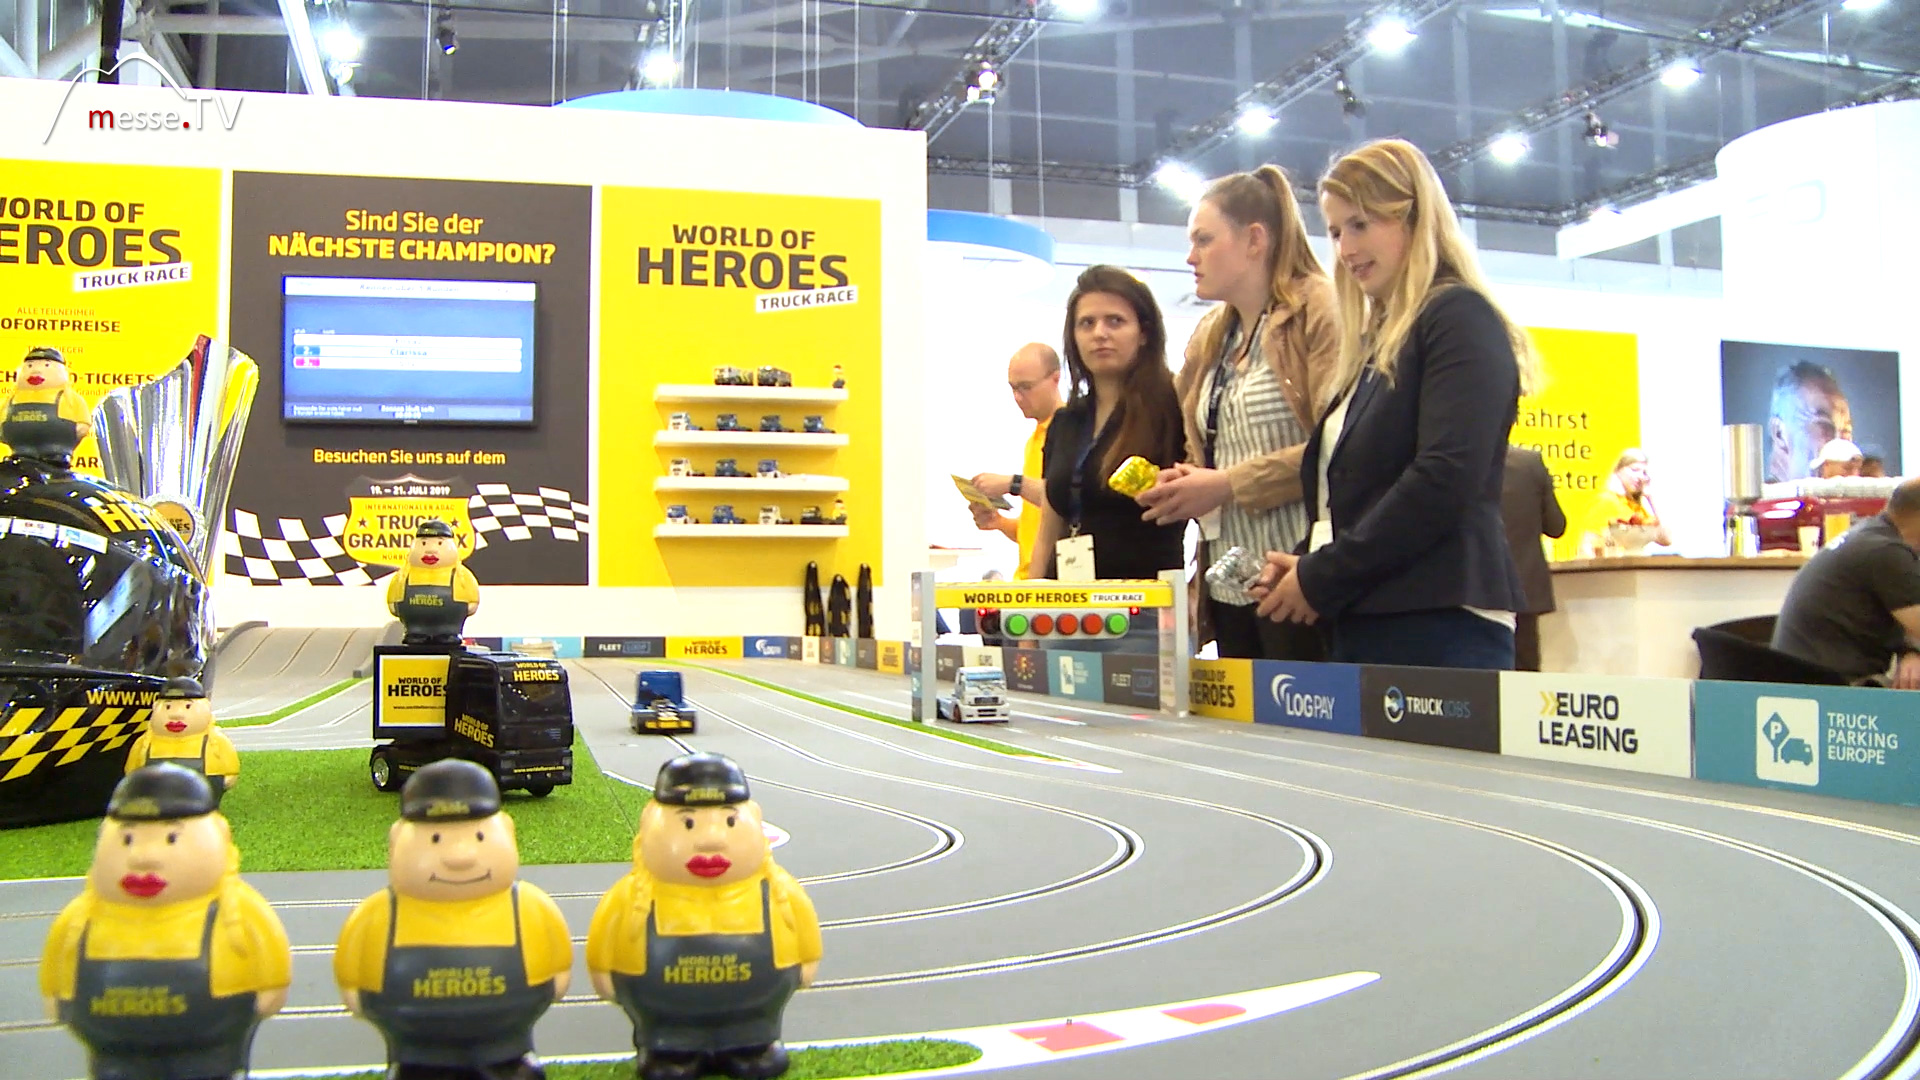 World of Heroes transport logistic 2019 Messe Muenchen